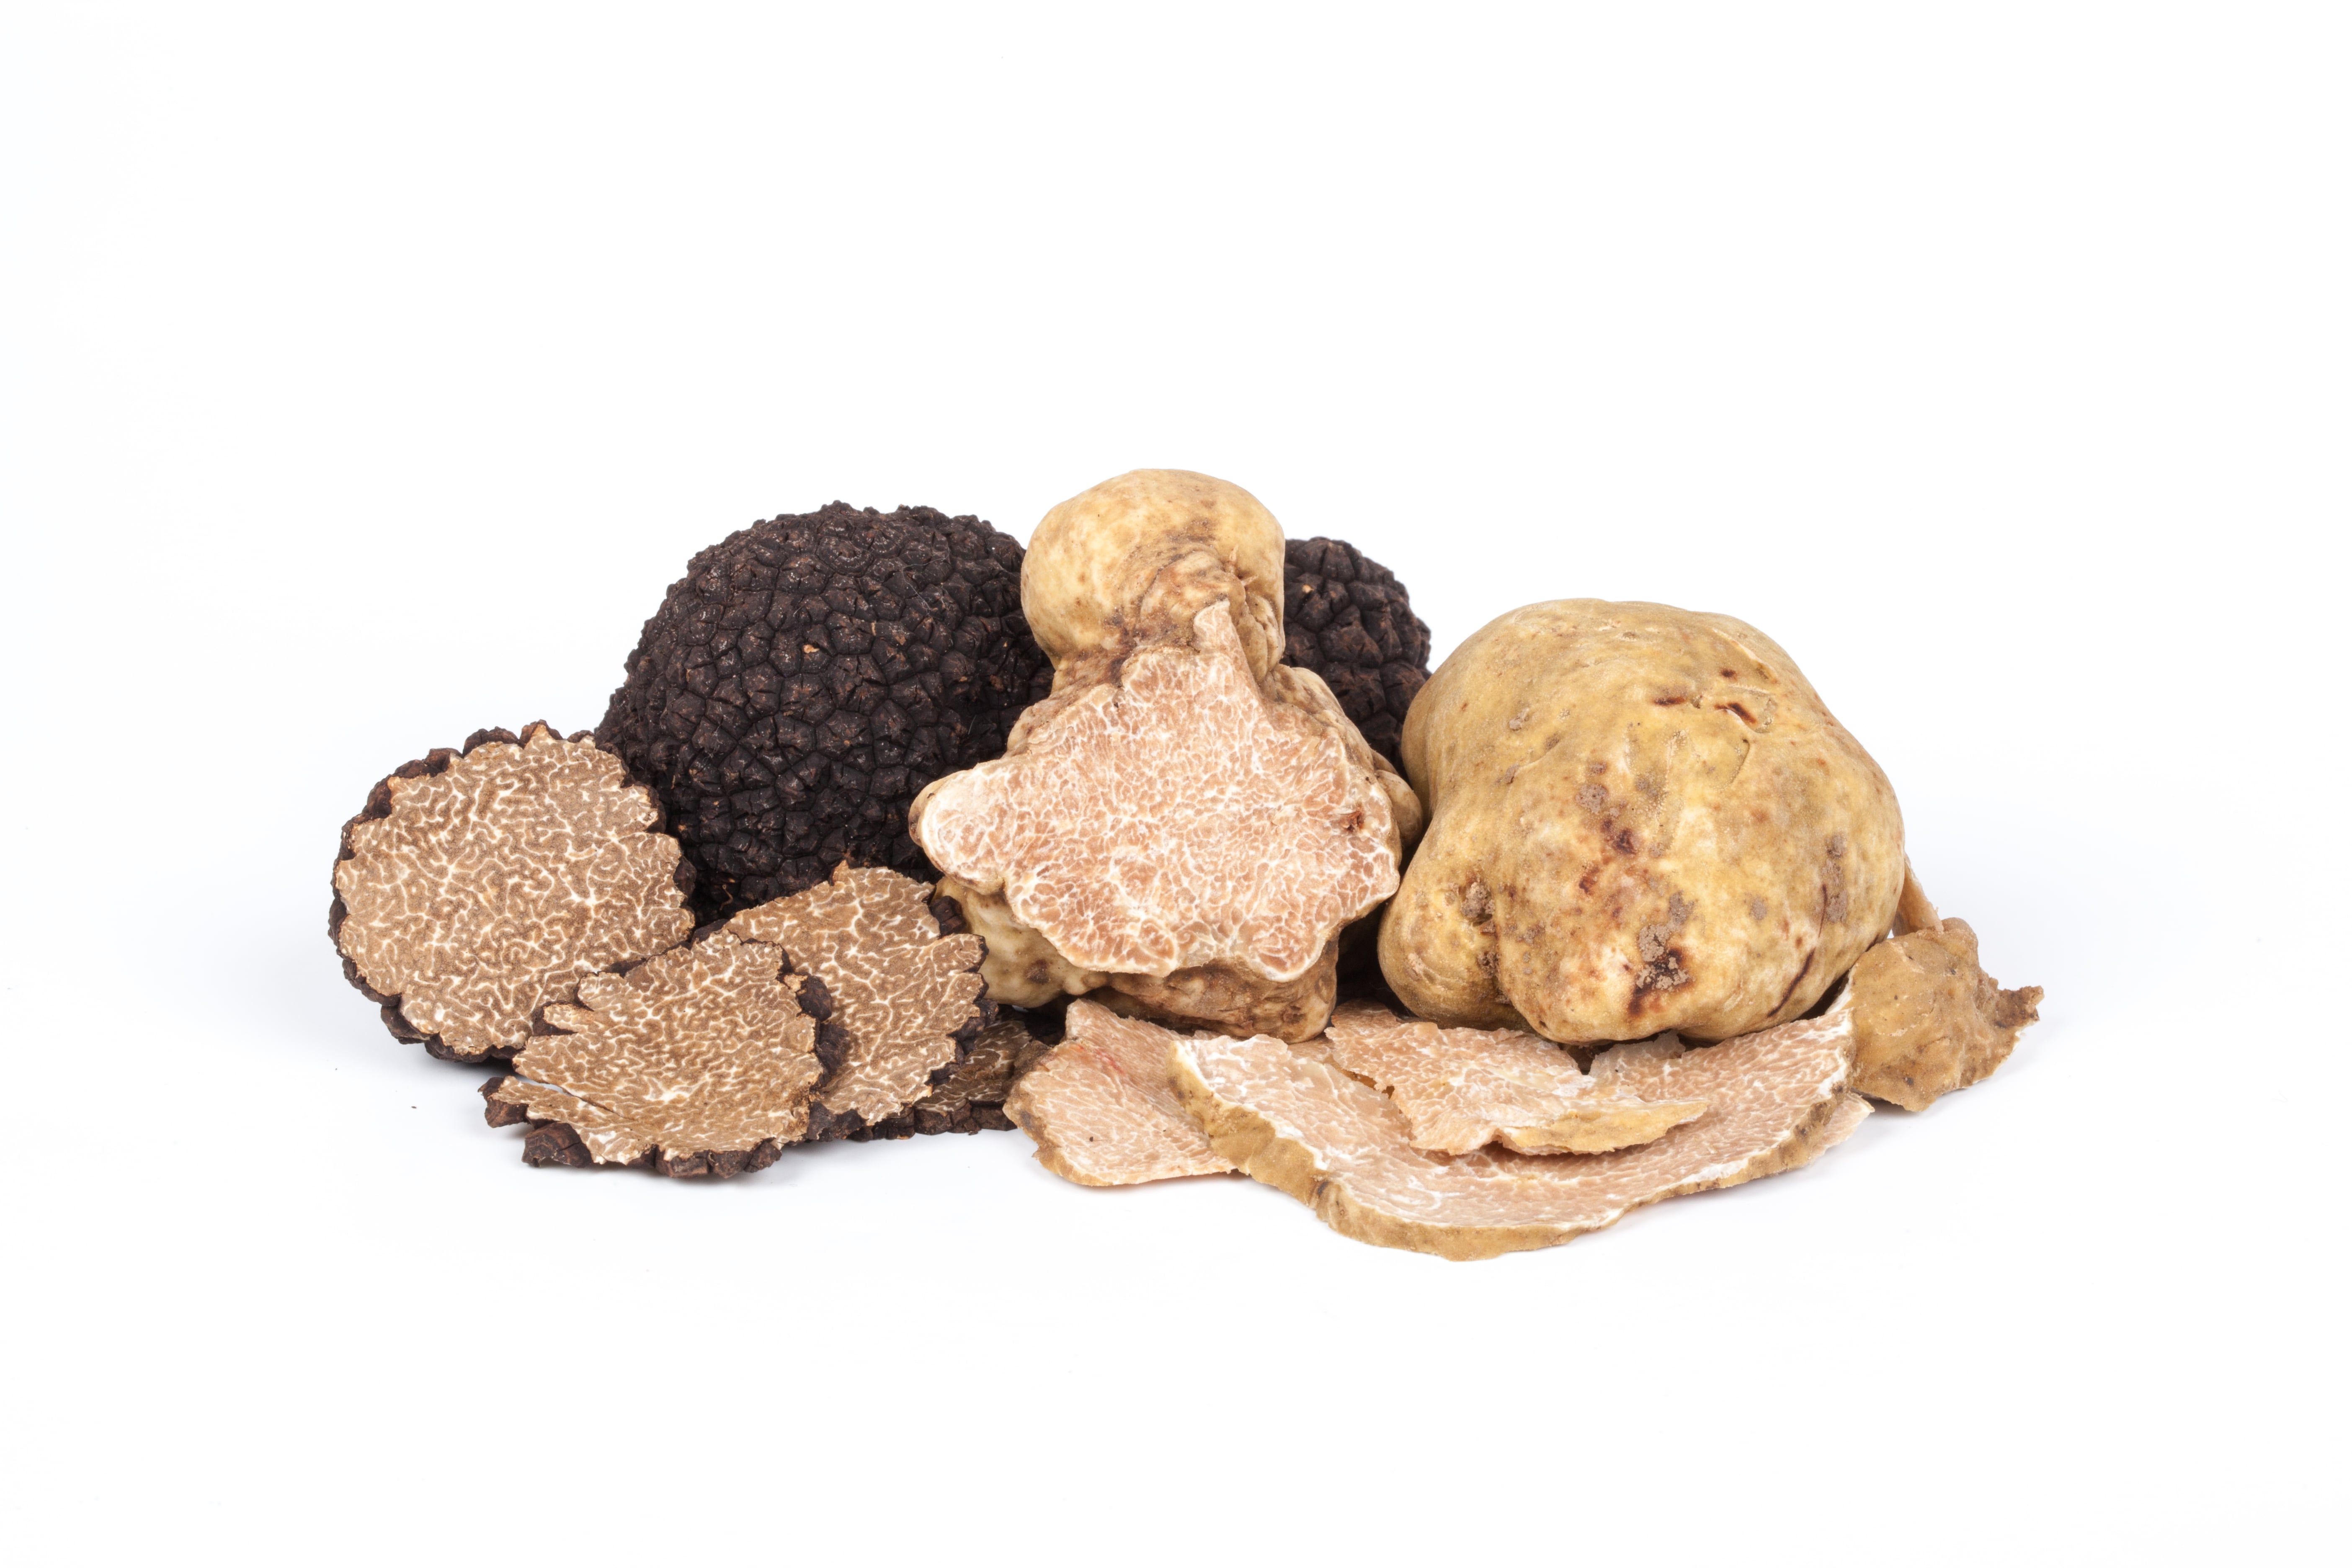 White Truffles vs. Black Truffles: Differences, Cost, and Recipes